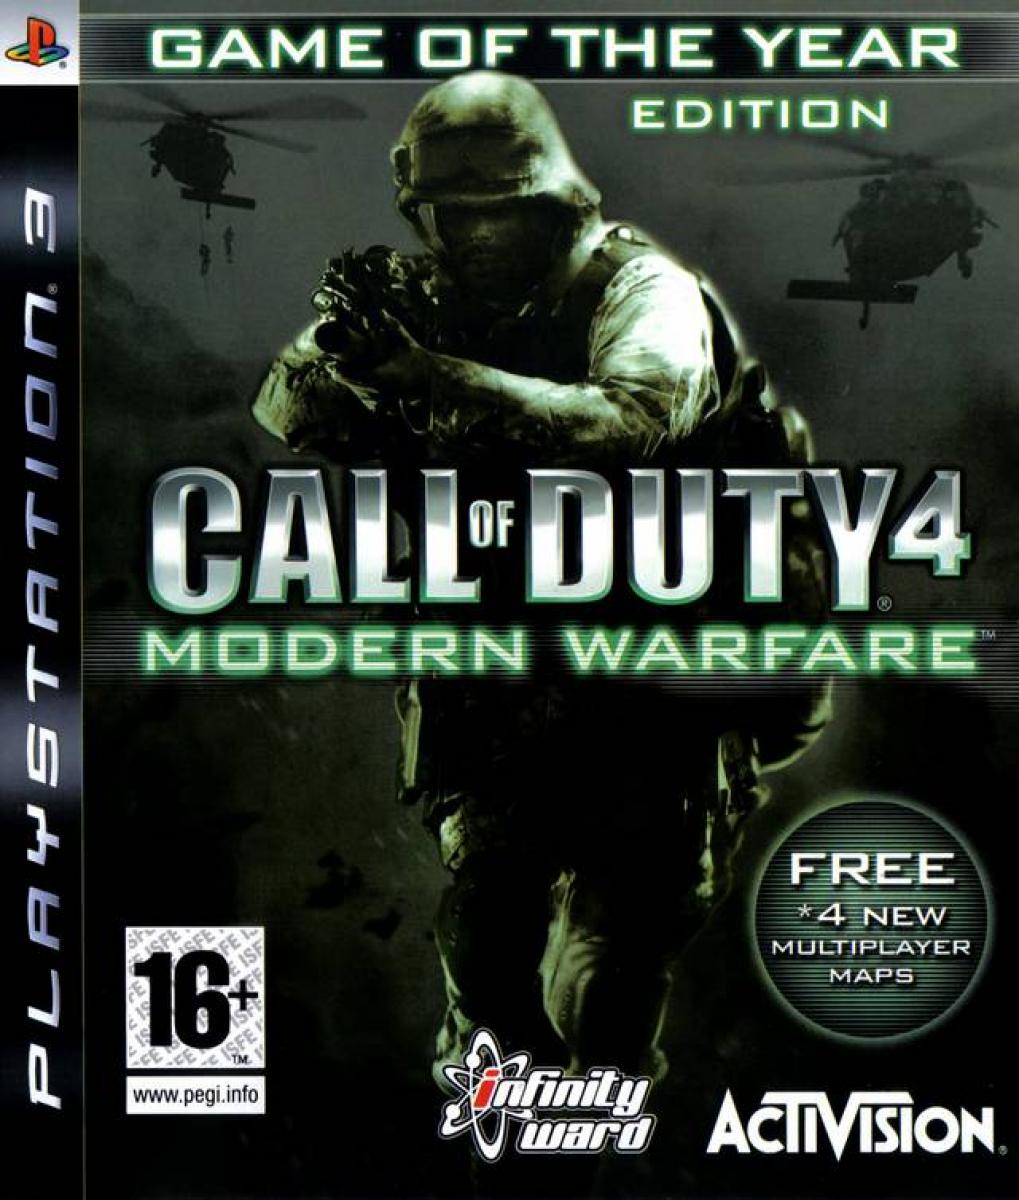 Call of Duty 4: Modern Warfare (PlayStation 3: Game of the Year Edition)